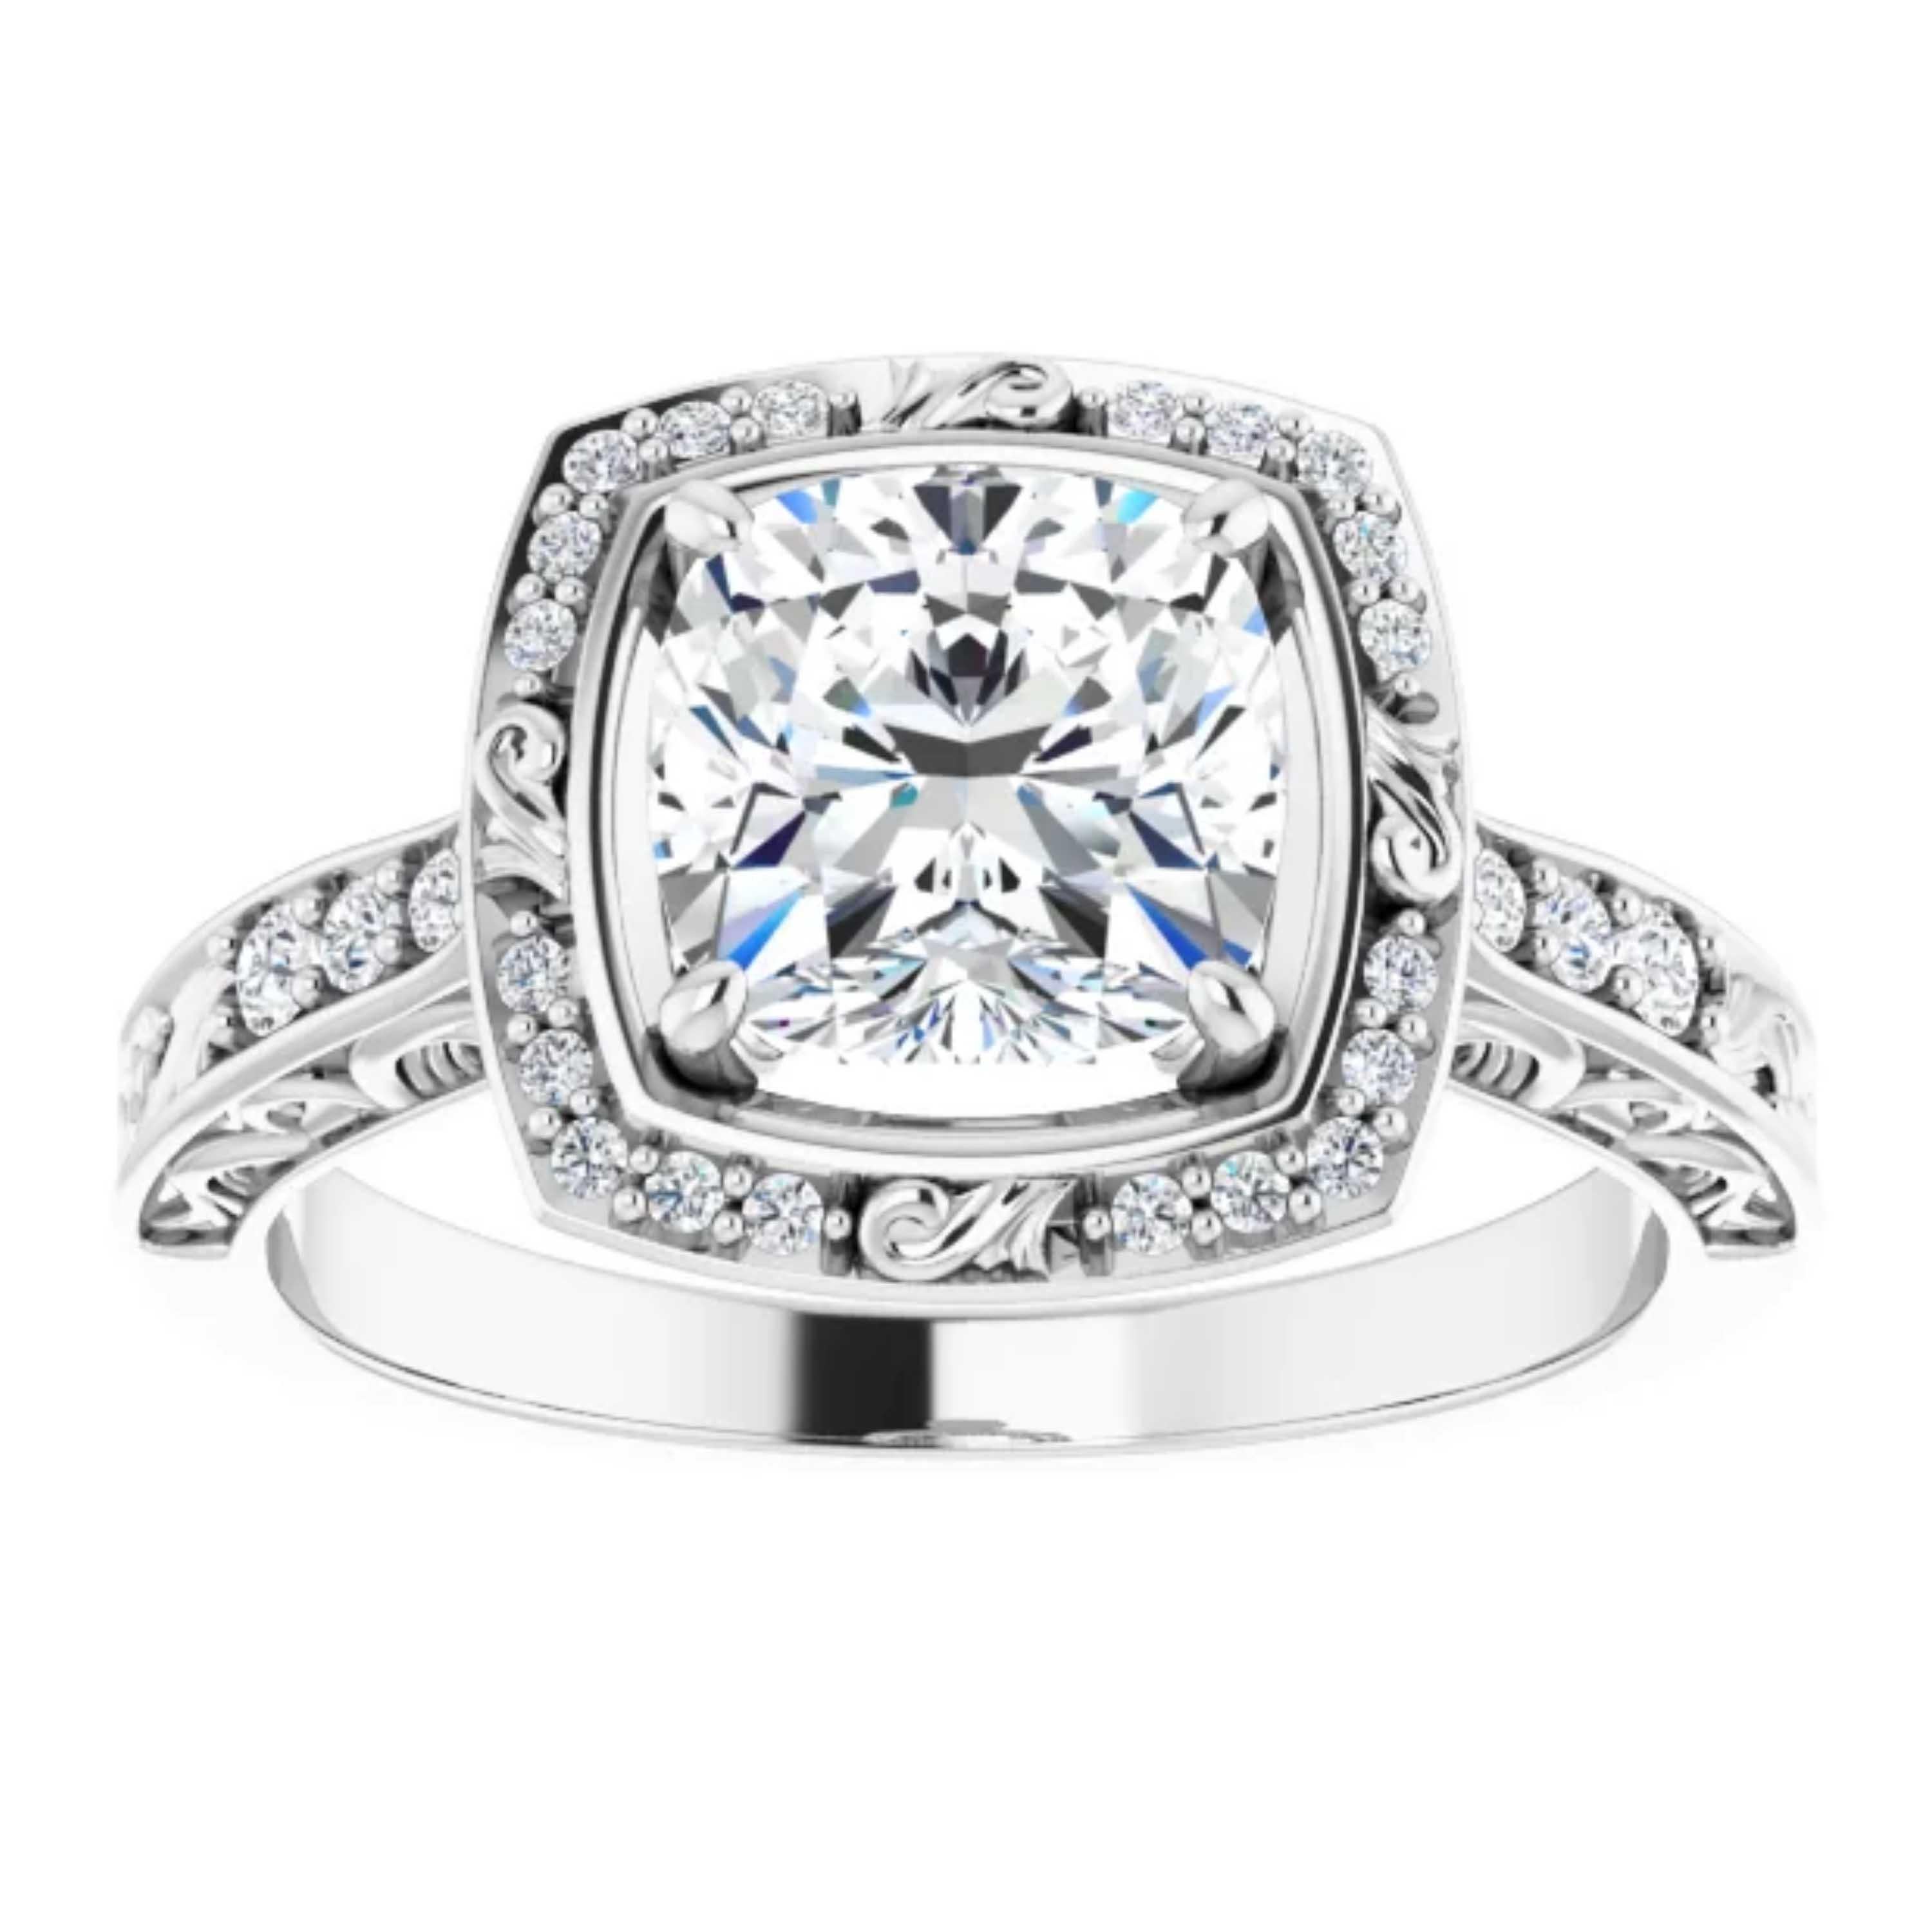 Intricate filigrees adorn the shank and halo of this vintage style GIA certified engagement ring. The cushion cut center diamond is amplified by a halo of shimmering natural white diamonds. Additional diamonds float along the shank. Handcrafted in